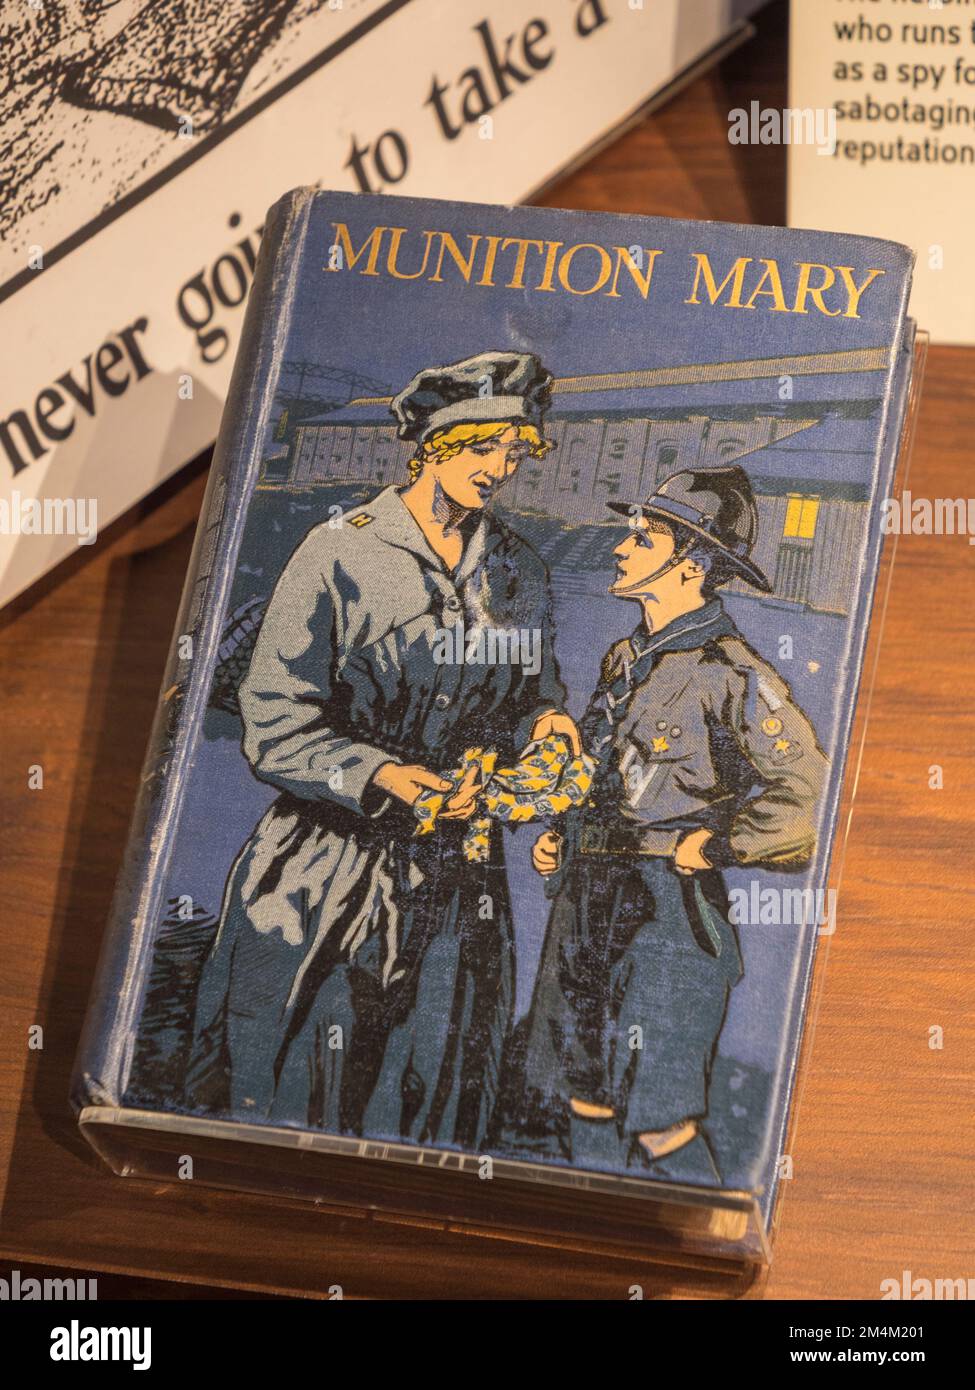 'Munition Mary', a WWI novel about a 'munitionette' uncovering a spy in the Imperial War Museum, London, UK. Stock Photo